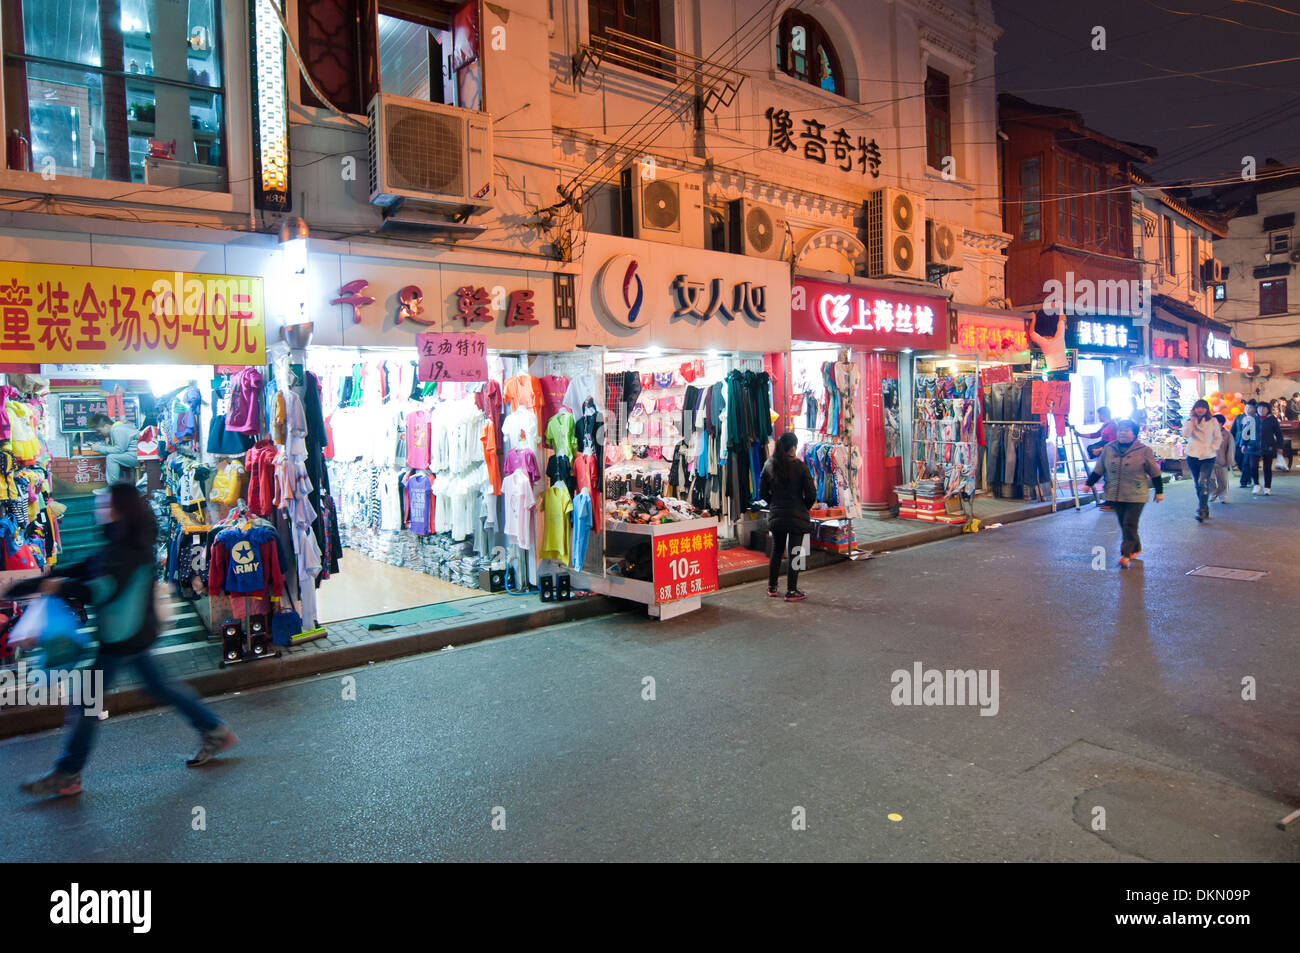 Clothes shop street in Shanghai, China Stock Photo